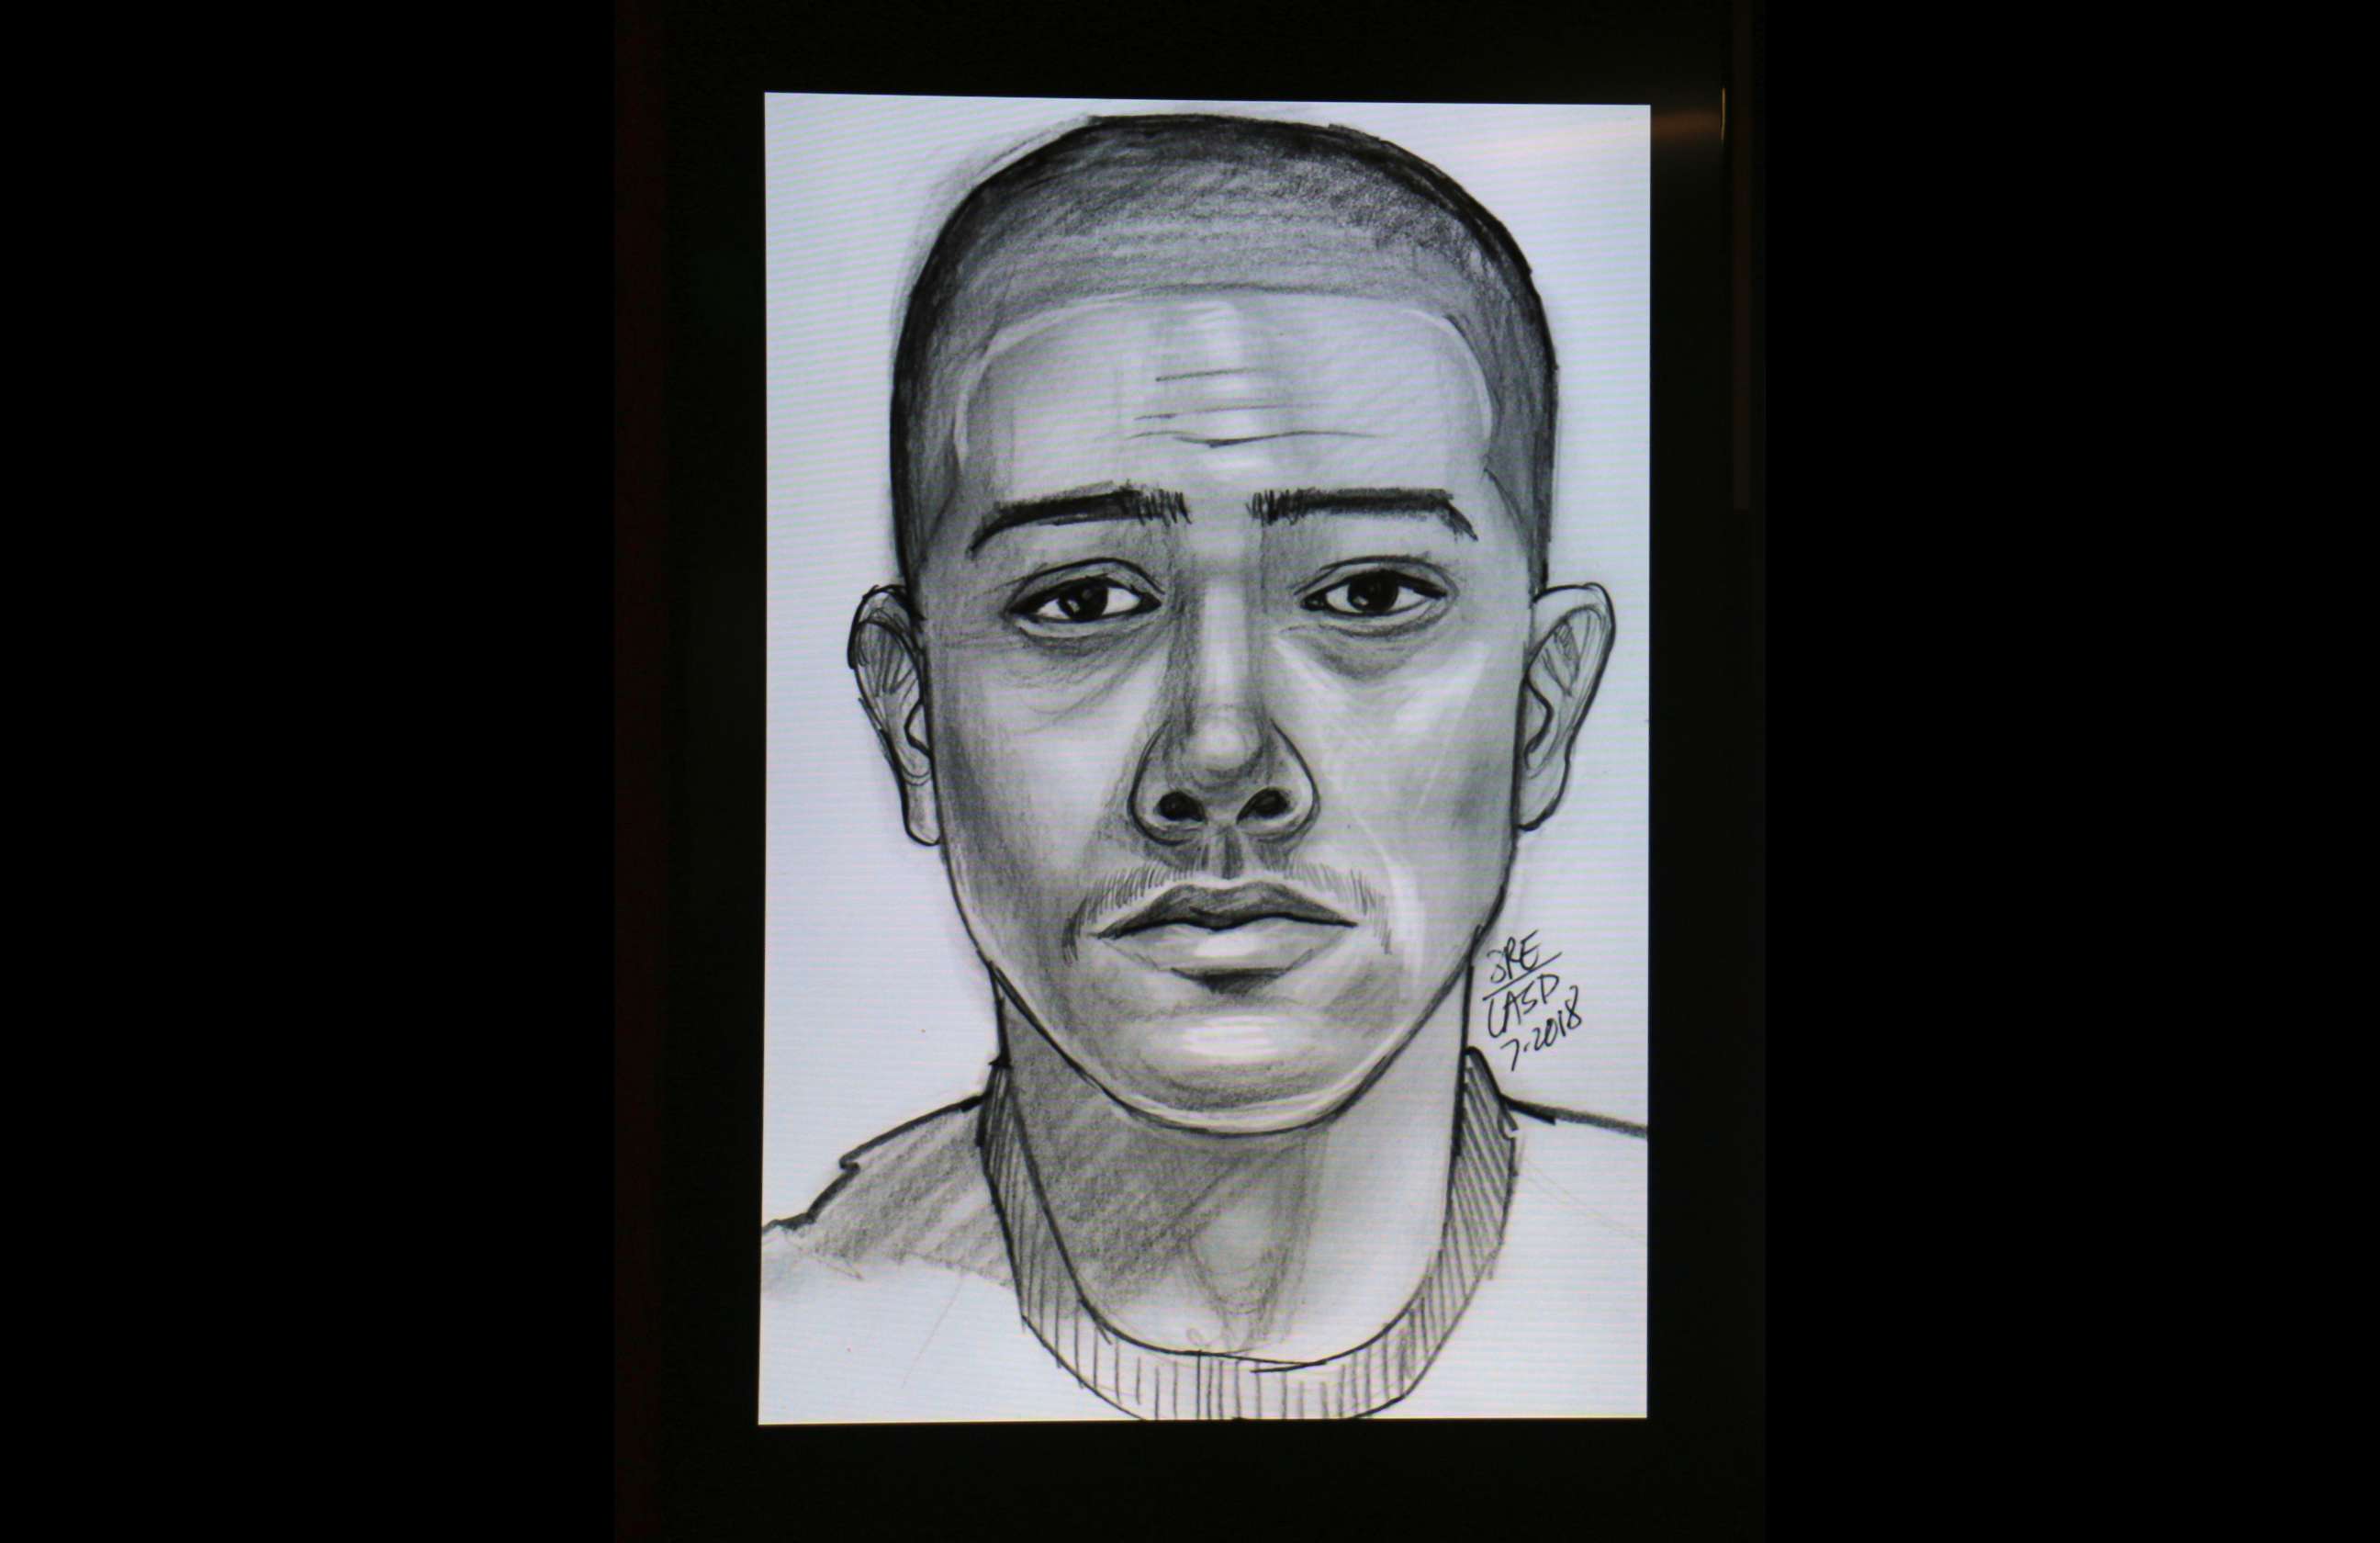 PHOTO: A composite image released Tuesday, July 17, 2018, by the Los Angeles County Sheriff's Department includes a sketch of a man of interest in the unsolved killing of Edward Berber that occurred in 2005.